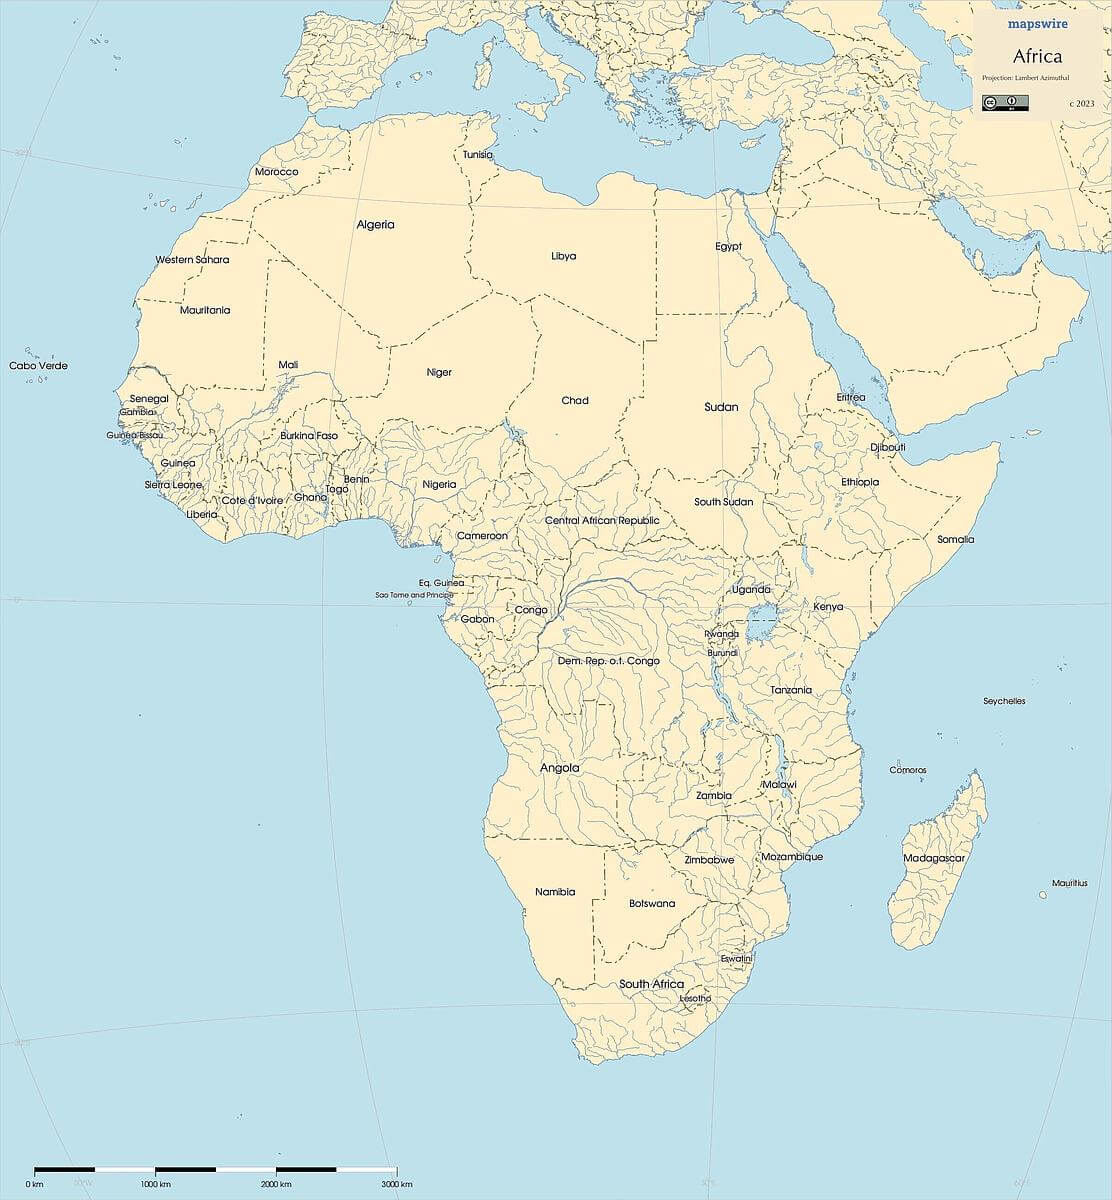 free-maps-of-africa-mapswire